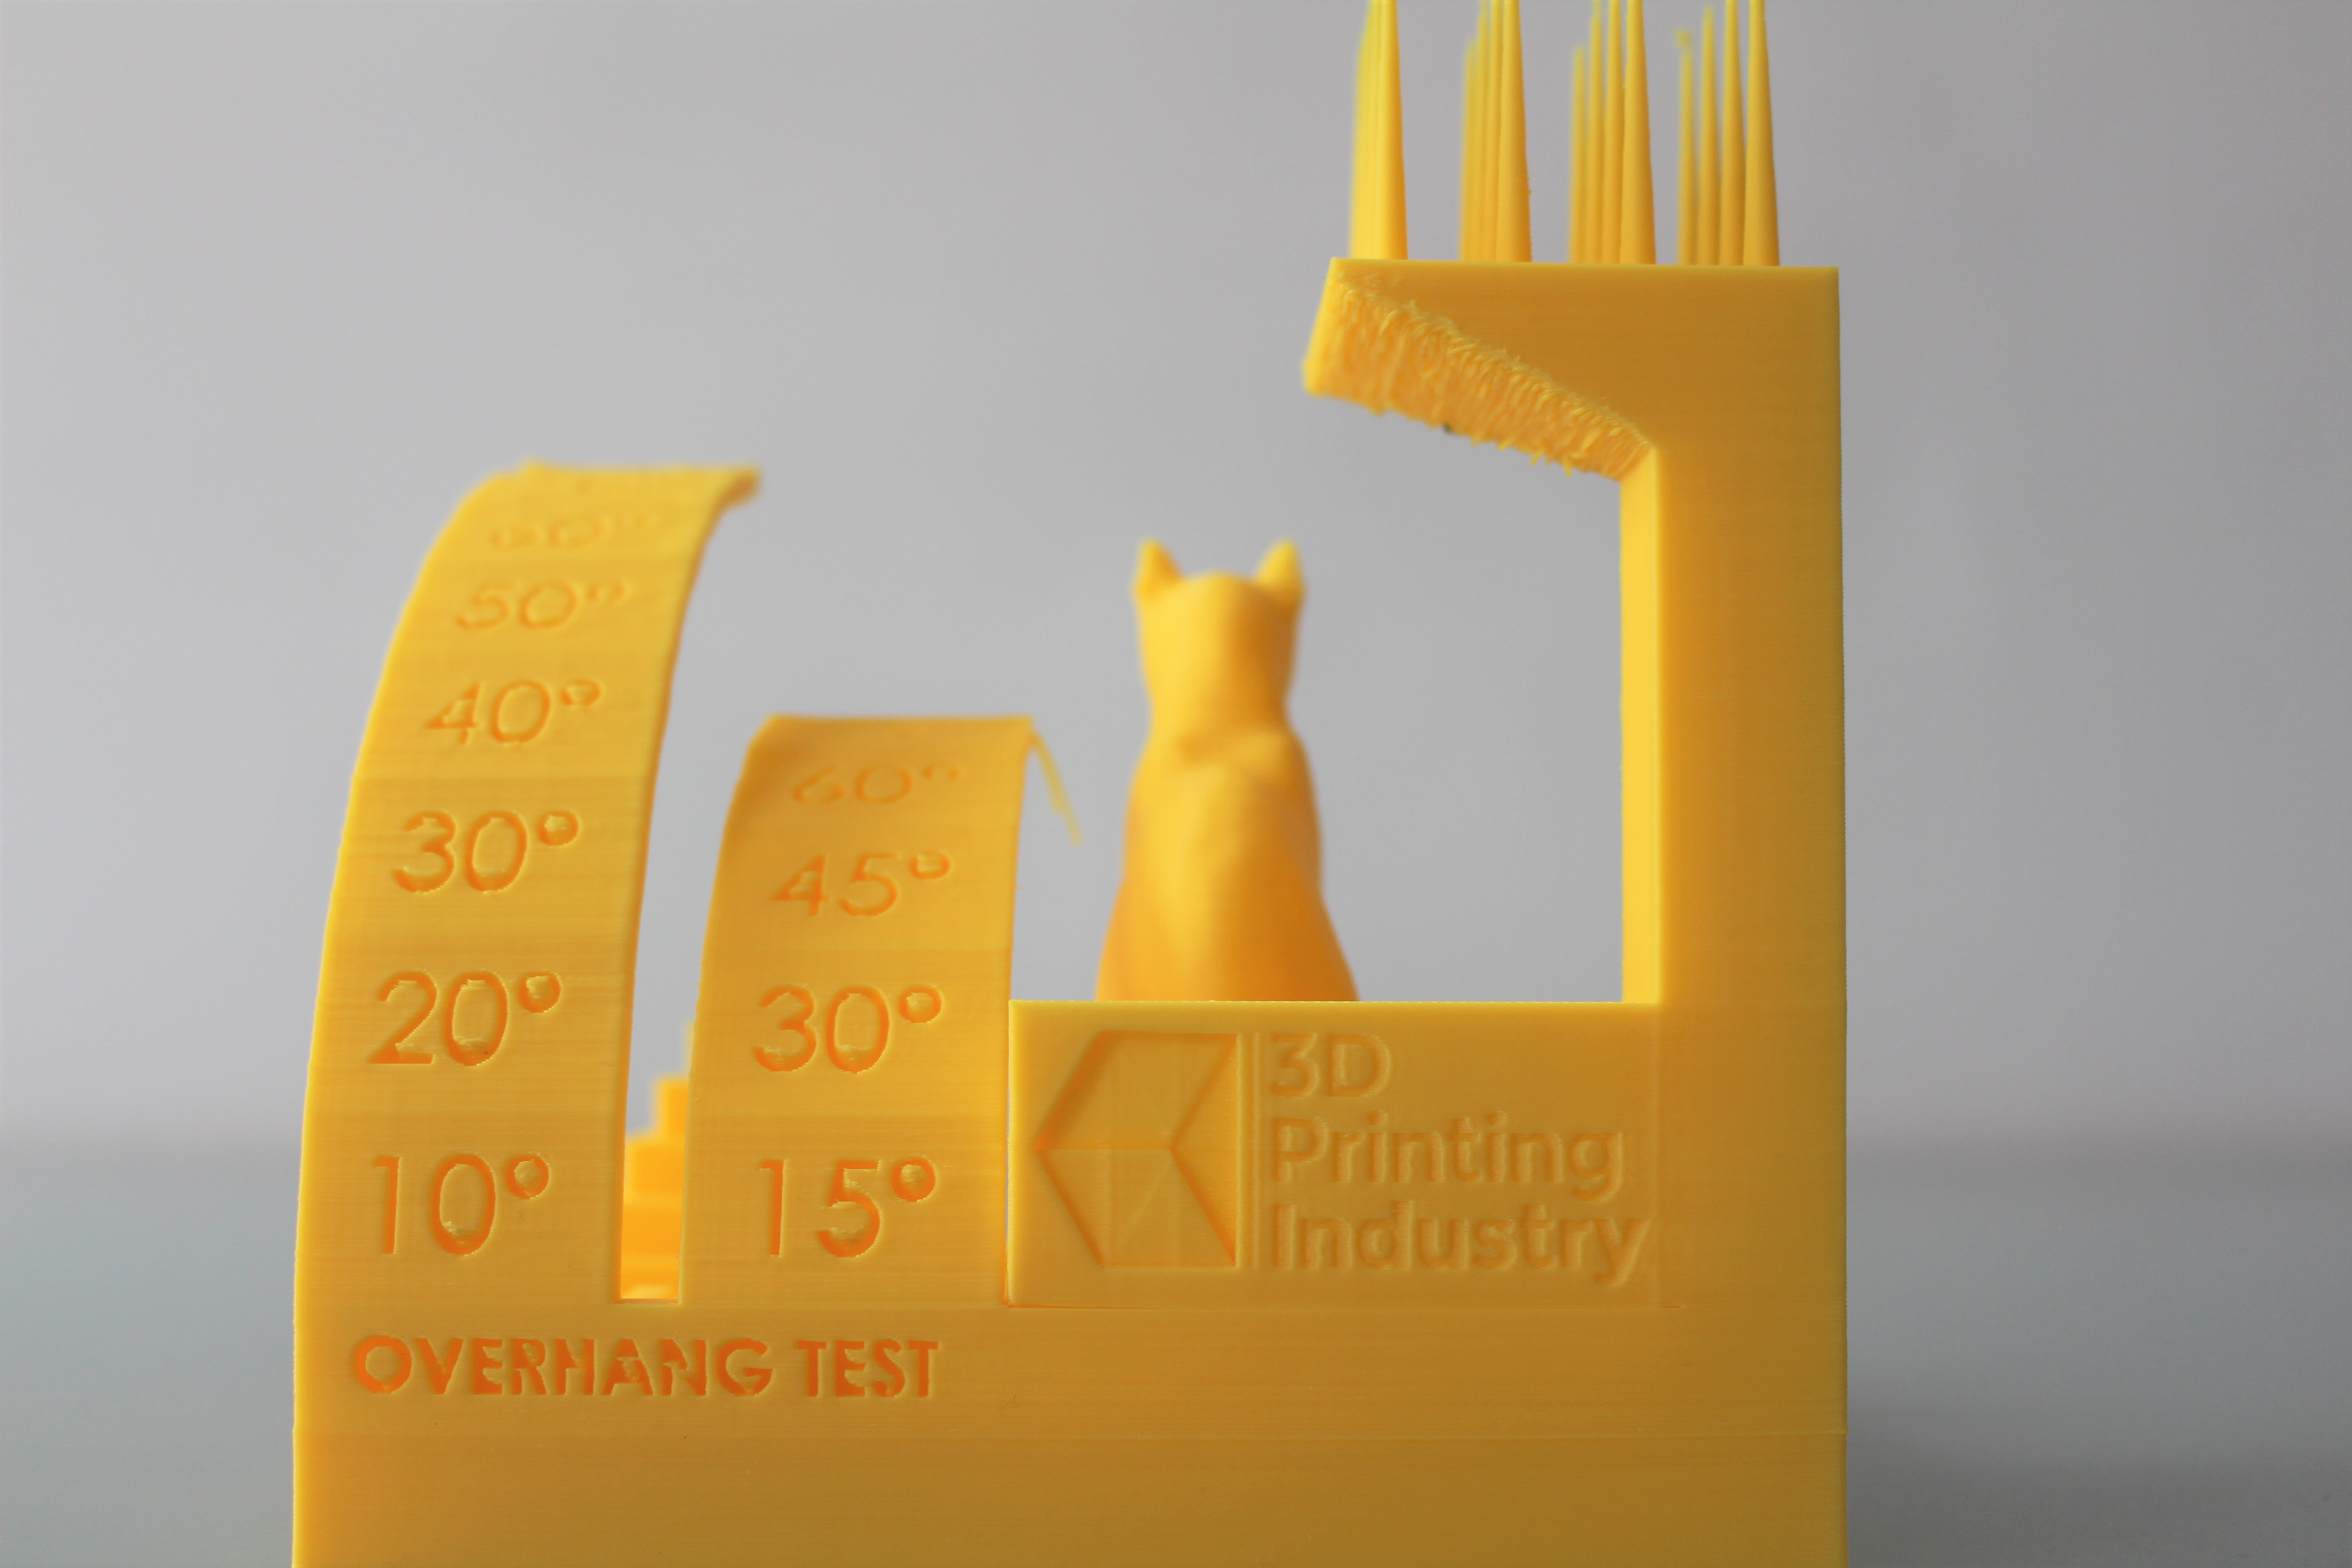 The overhang and retraction test sections. Photo by 3D Printing Industry.